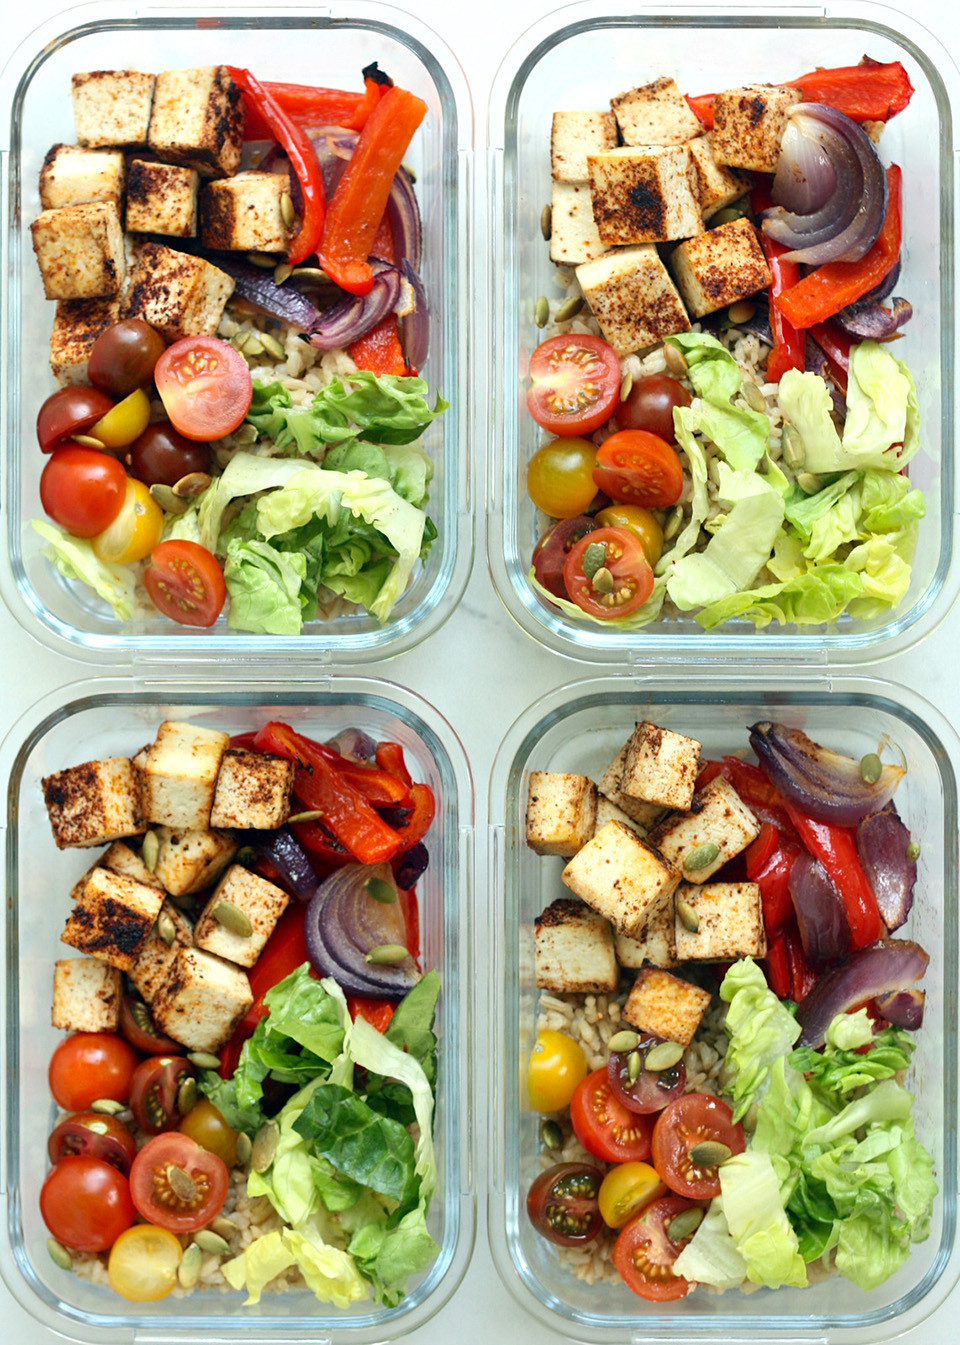 Vegan Protein Meal Prep
 How to Meal Prep a Week of High Protein Lunches in 30